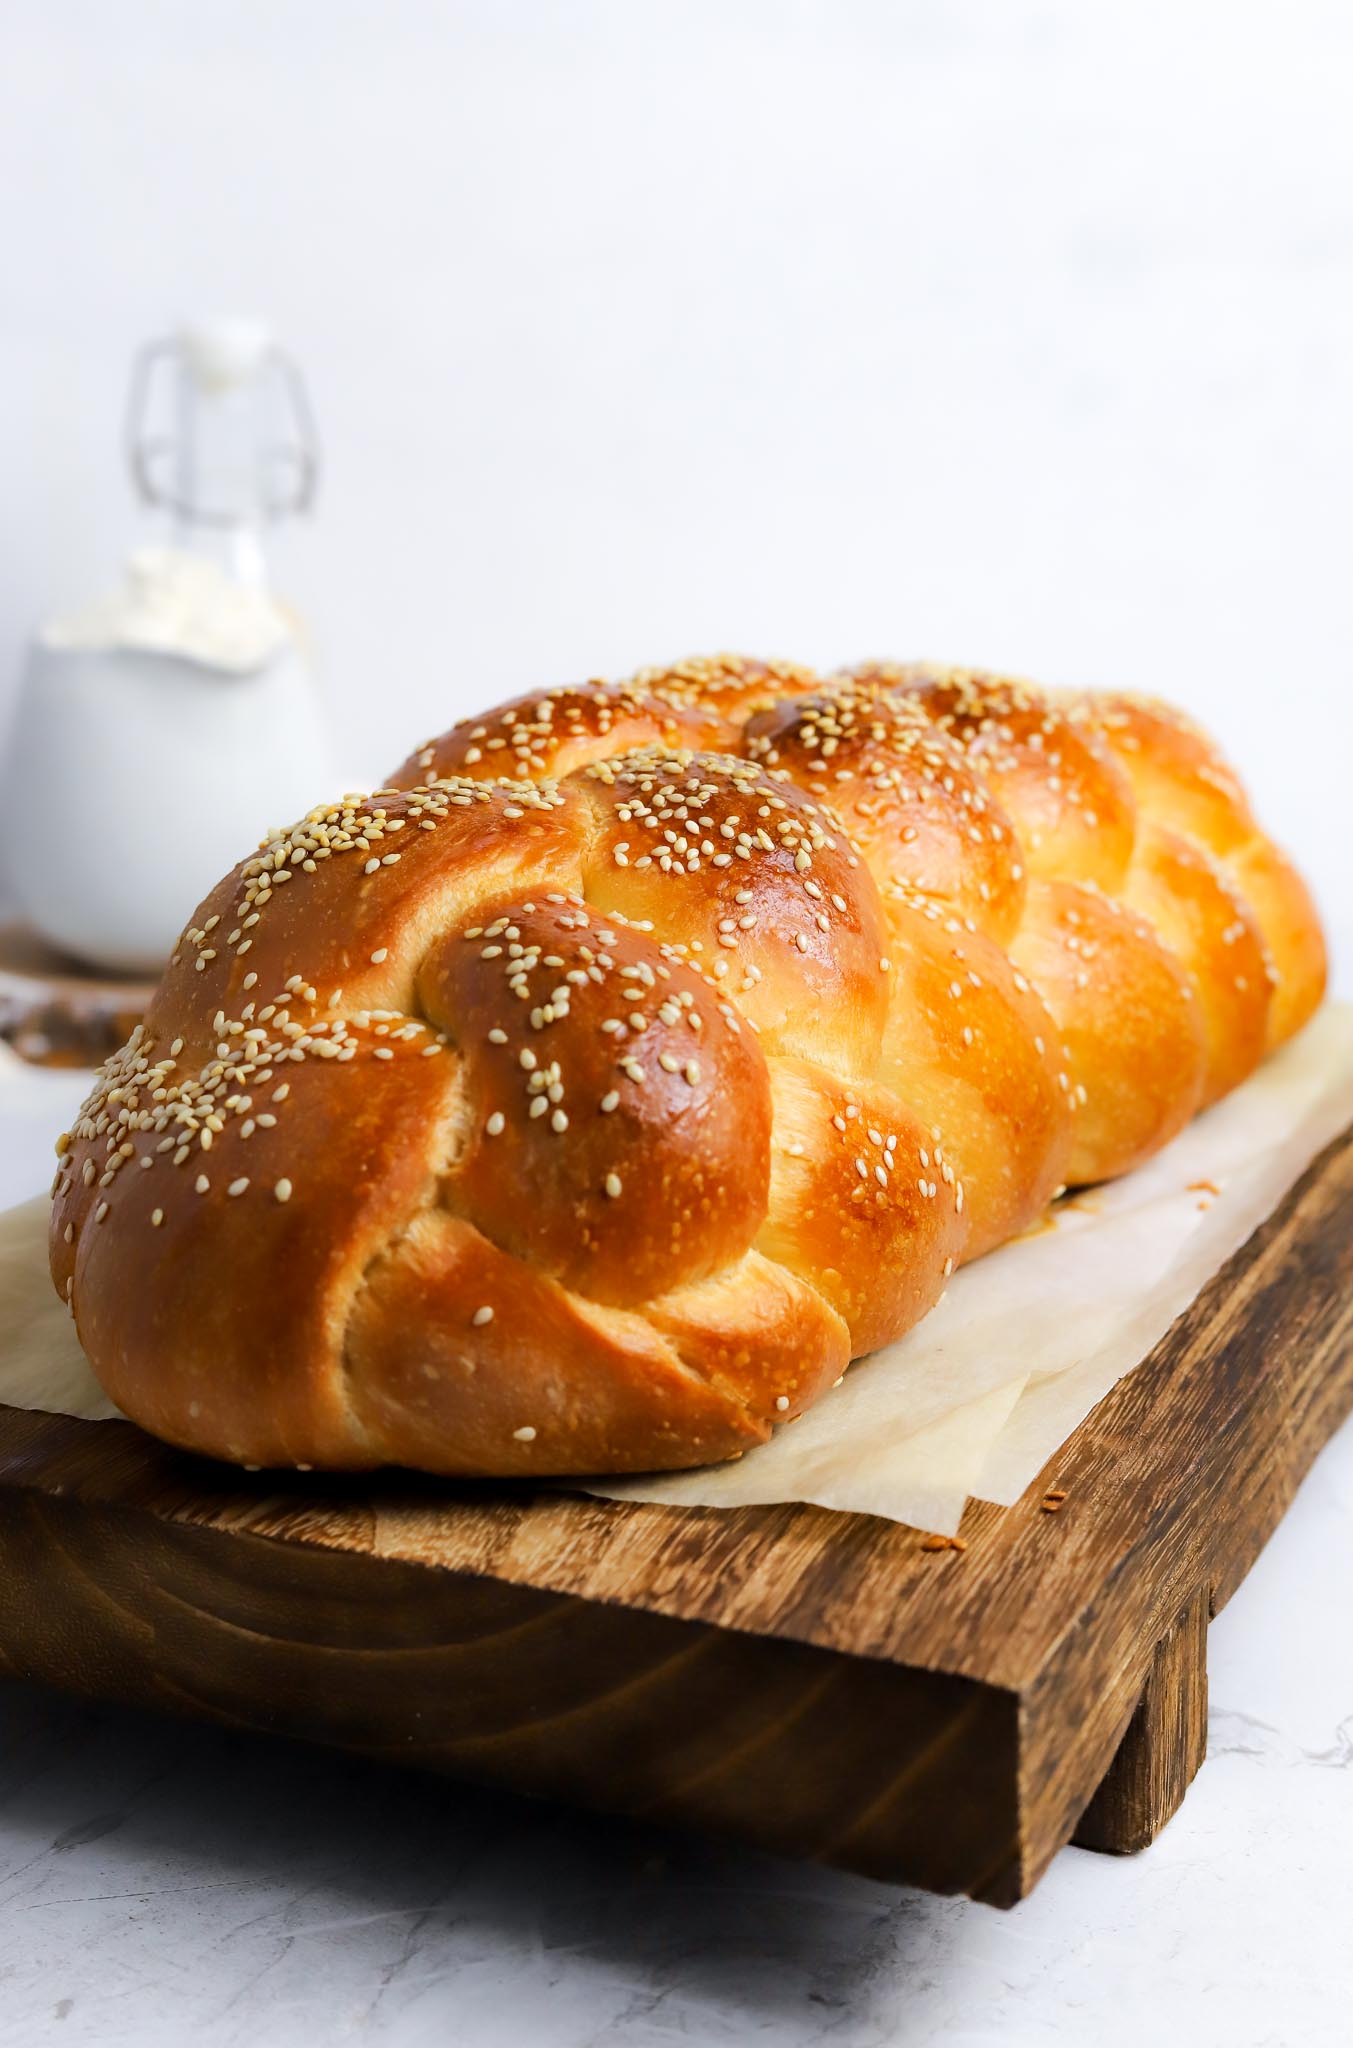 How To Make Sourdough Challah - Bread By Elise